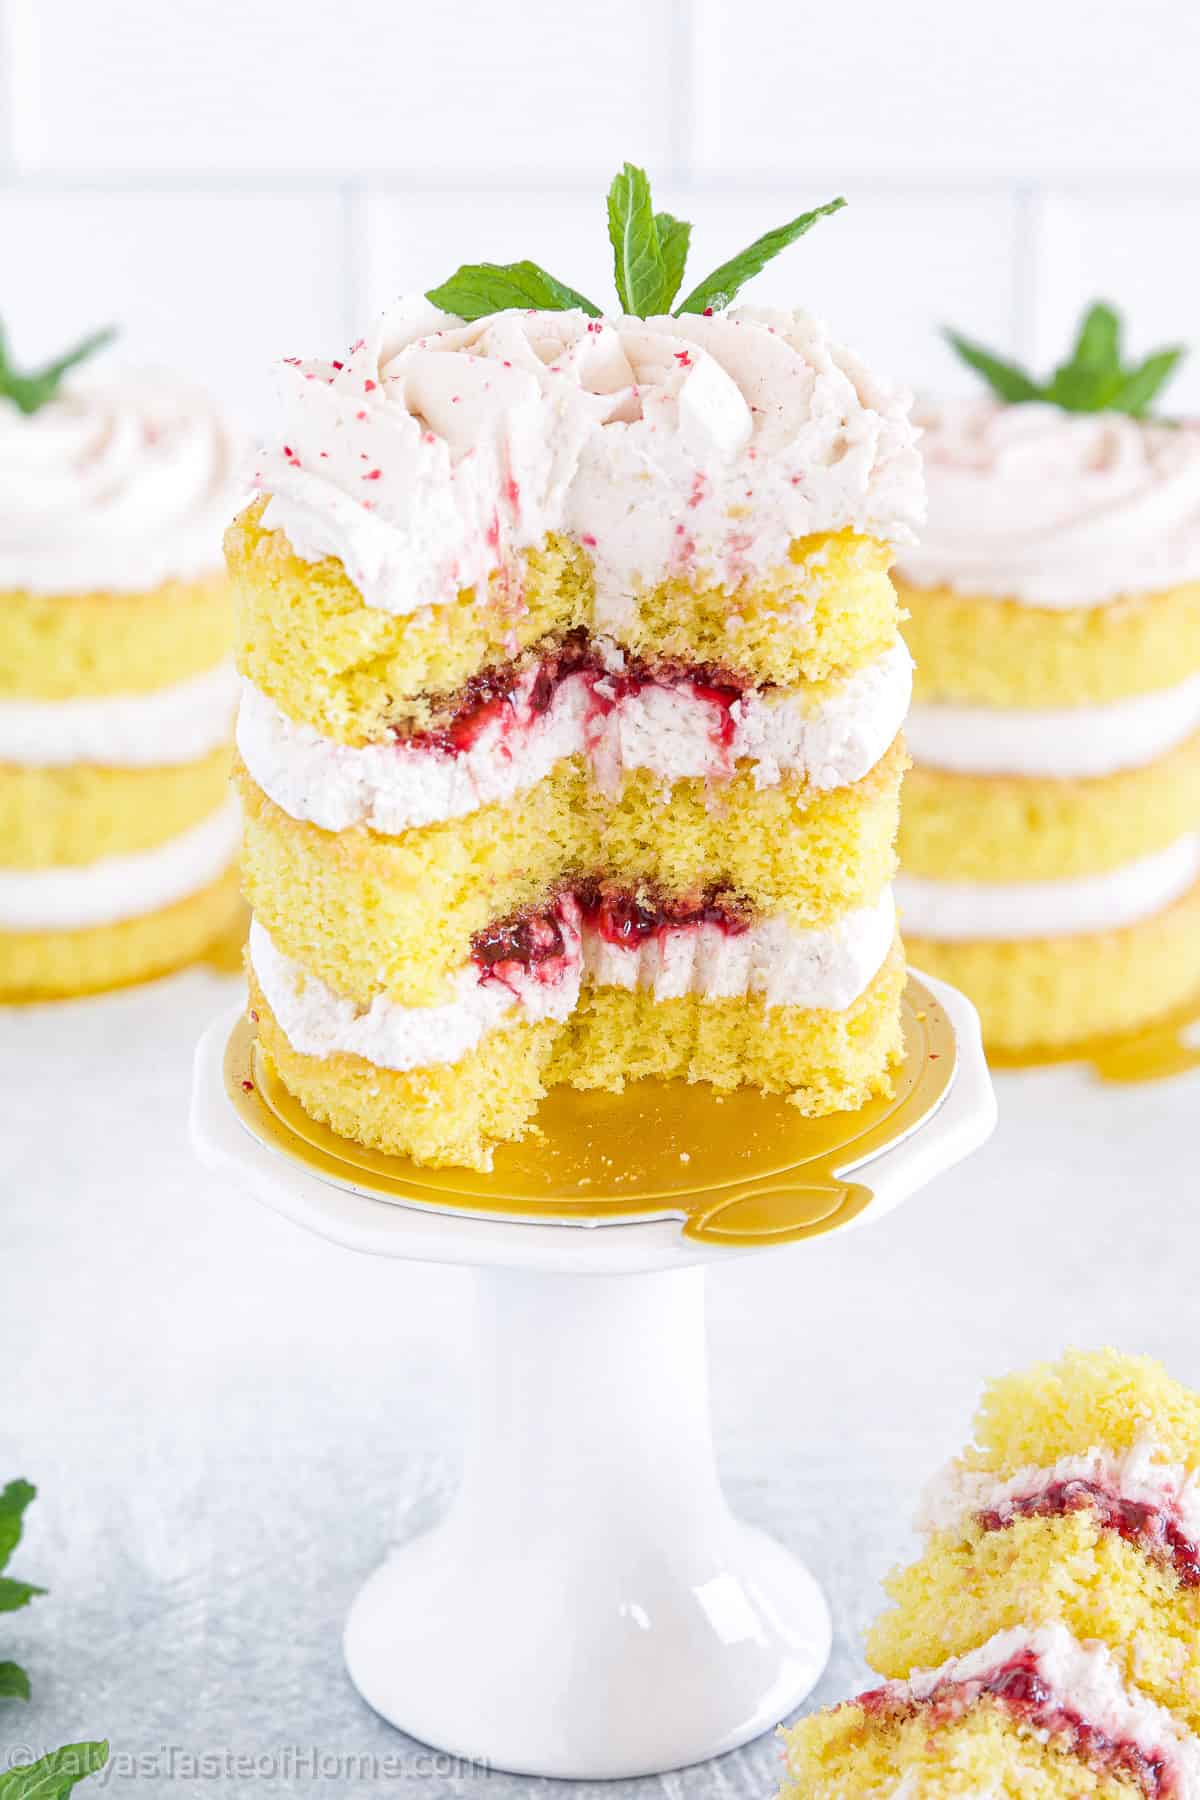 These Raspberry Mini Cakes are easy to make, plus they look and taste incredible! What's best is they're perfect for any occasion, especially Mother's Day!